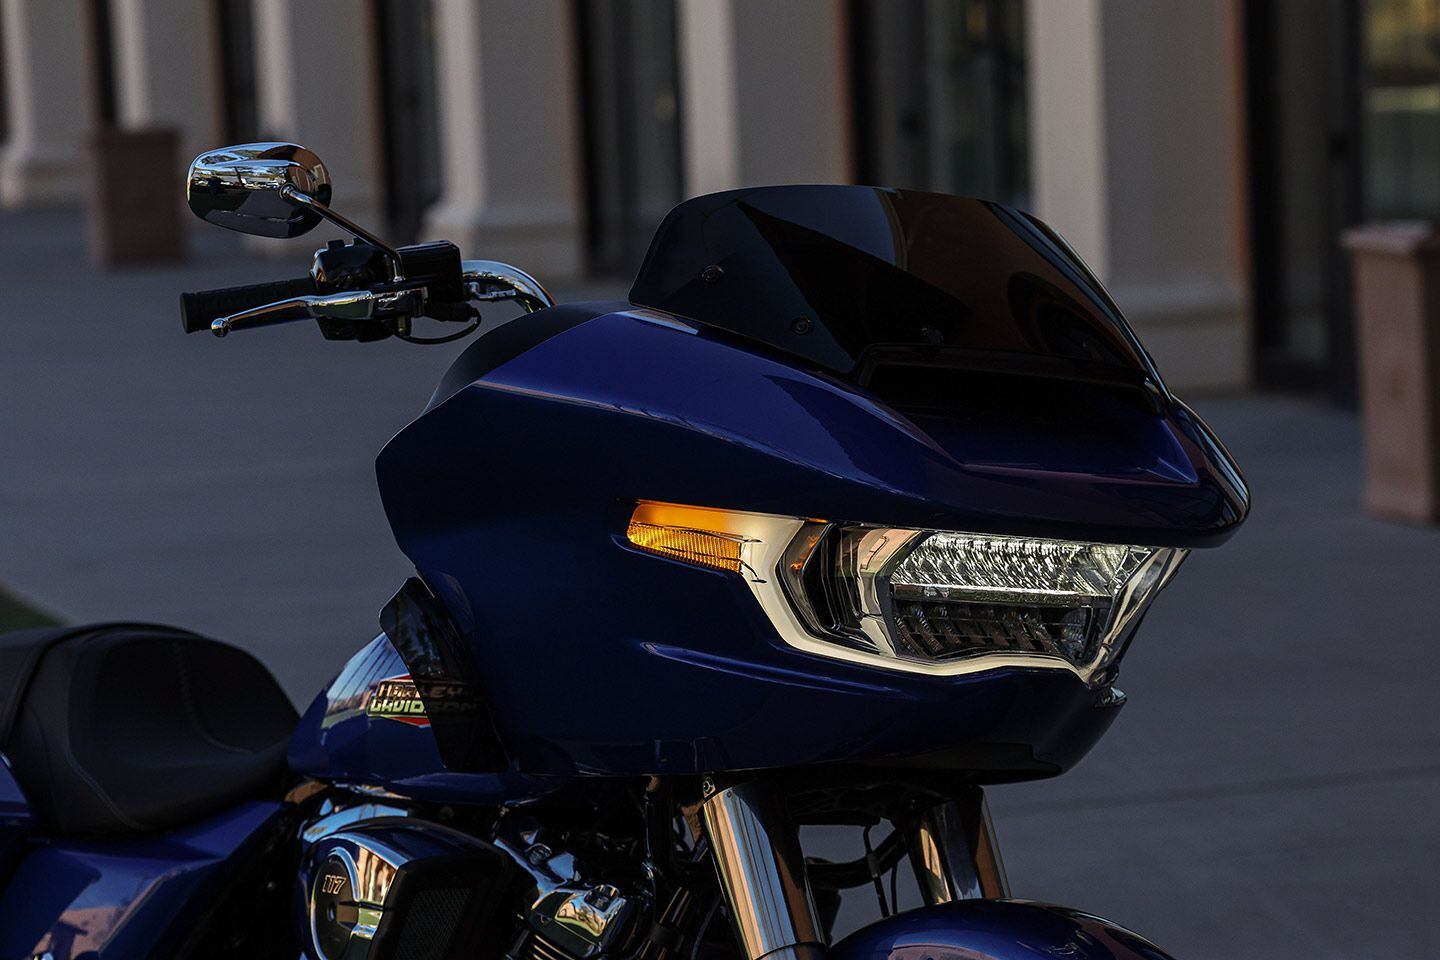 We are big fans of the Road Glide’s “lit signature.”